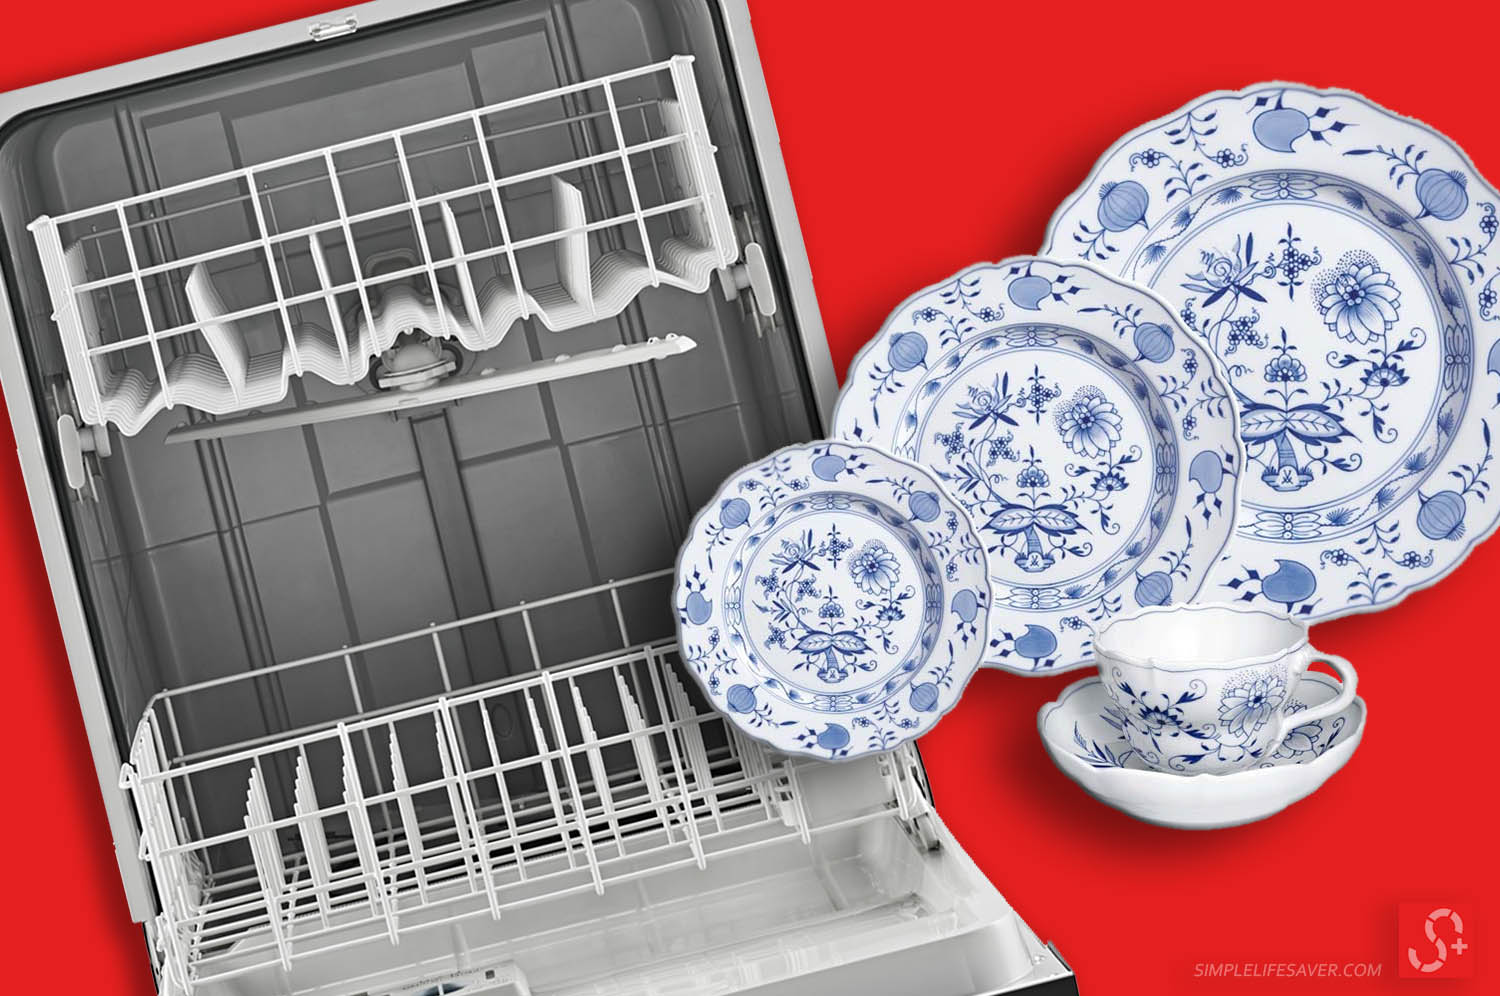 Plates and cup along a Dishwasher in front red background